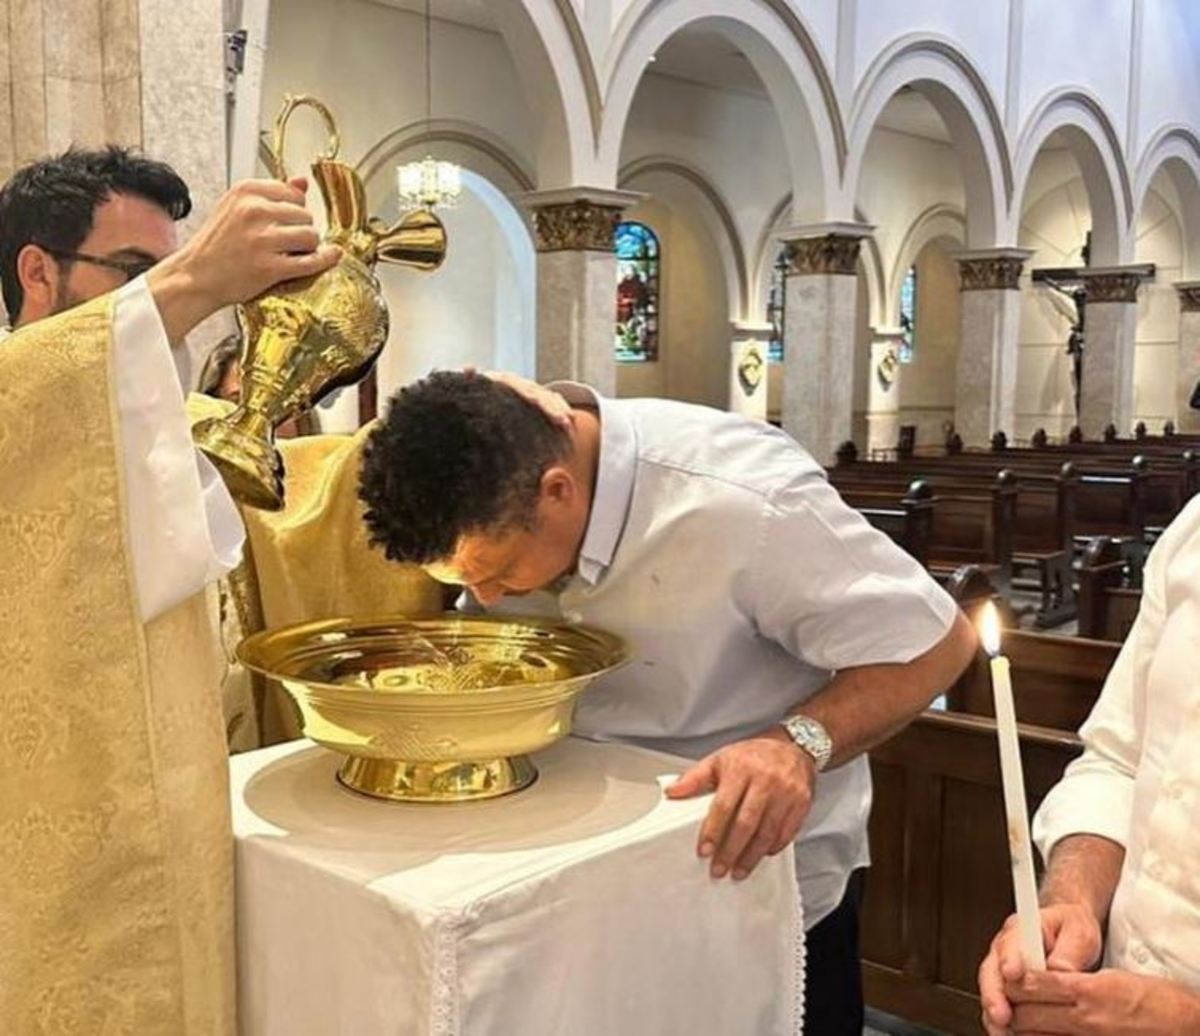 Brazil soccer legend Ronaldo pictured during his baptism ceremony in a Catholic church in Sao Paulo in September 2023